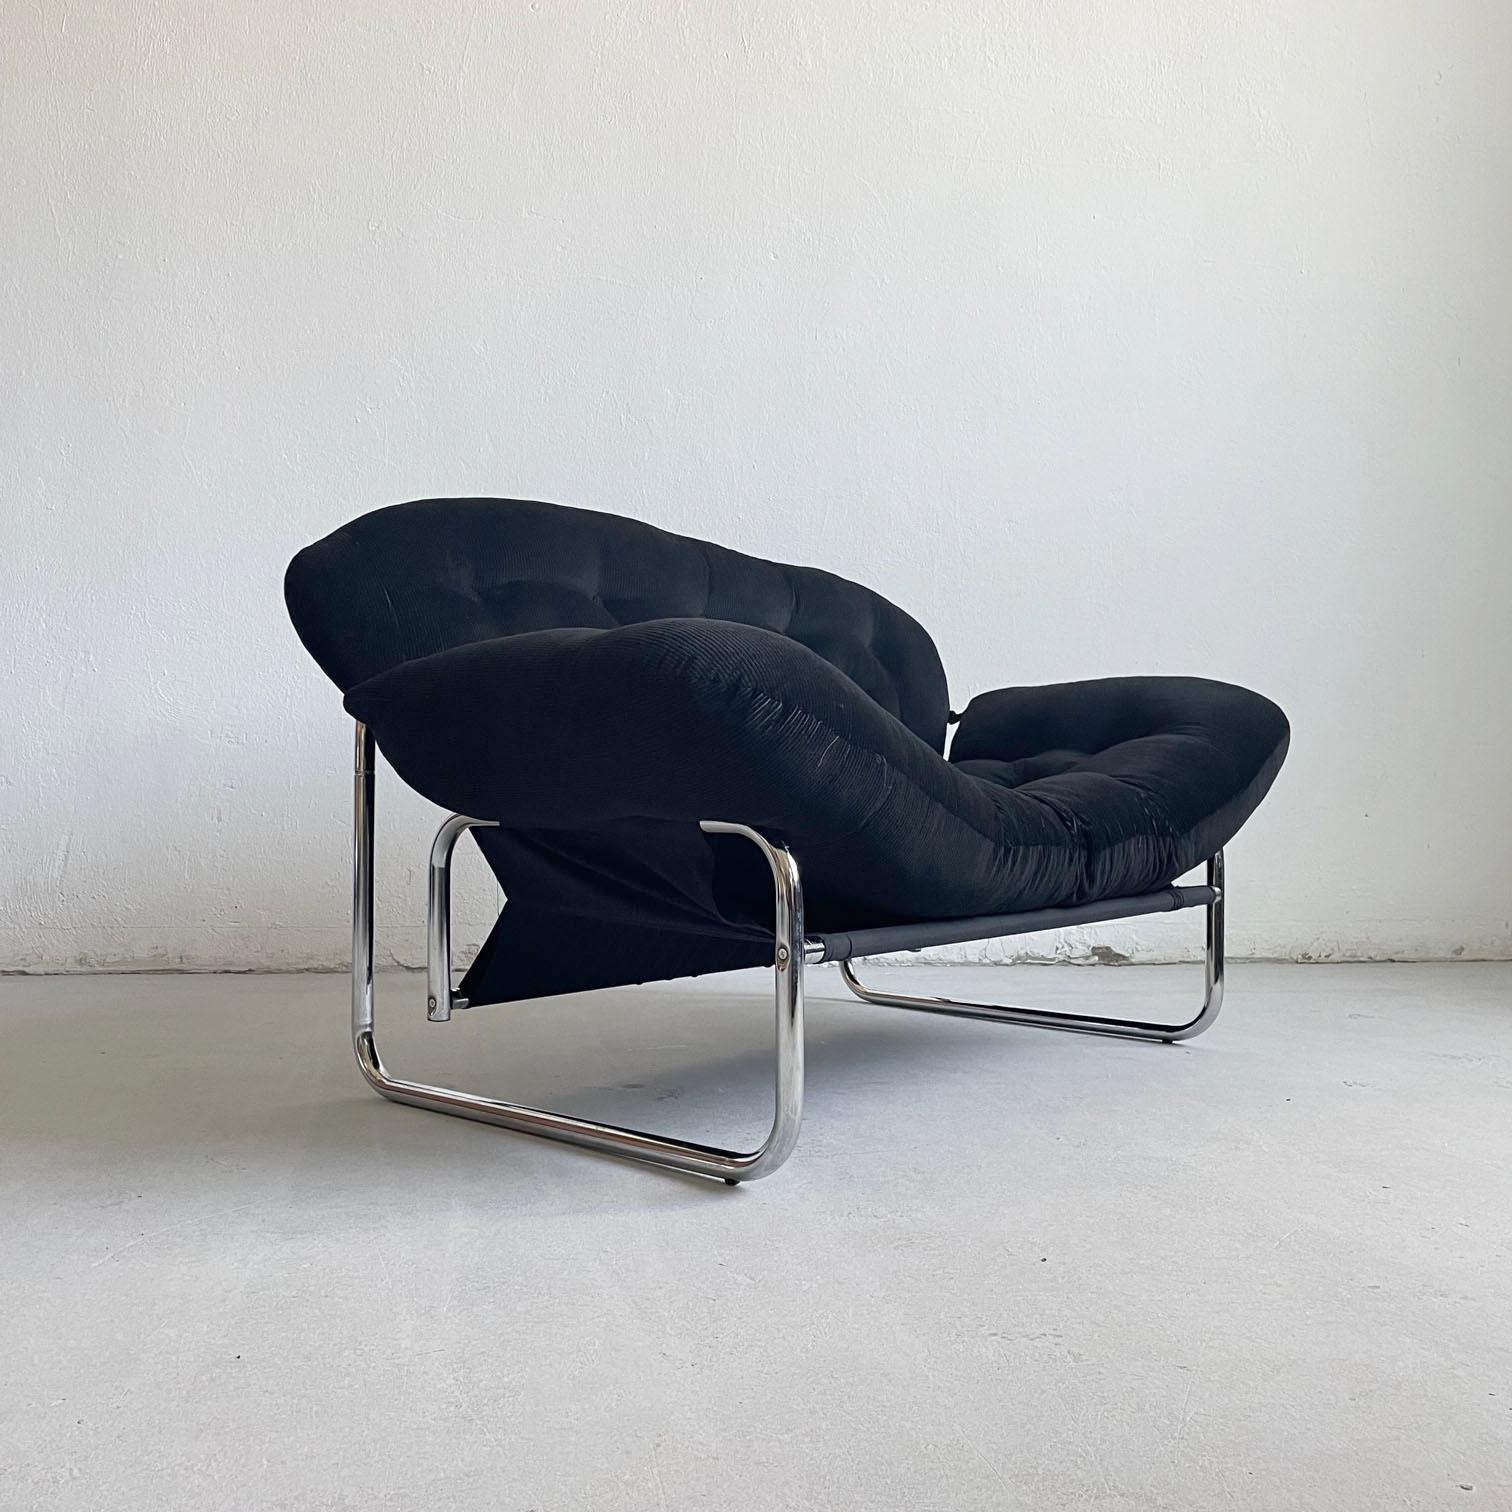 Exceptionally comfortable small 2-seater lounge sofa/love-seat manufactured in the 1970s by Swed Form

Design by Johan Bertil Häggström

The chair features a Bauhaus-style tubular chrome frame with a seat made of black canvas. The chair has an